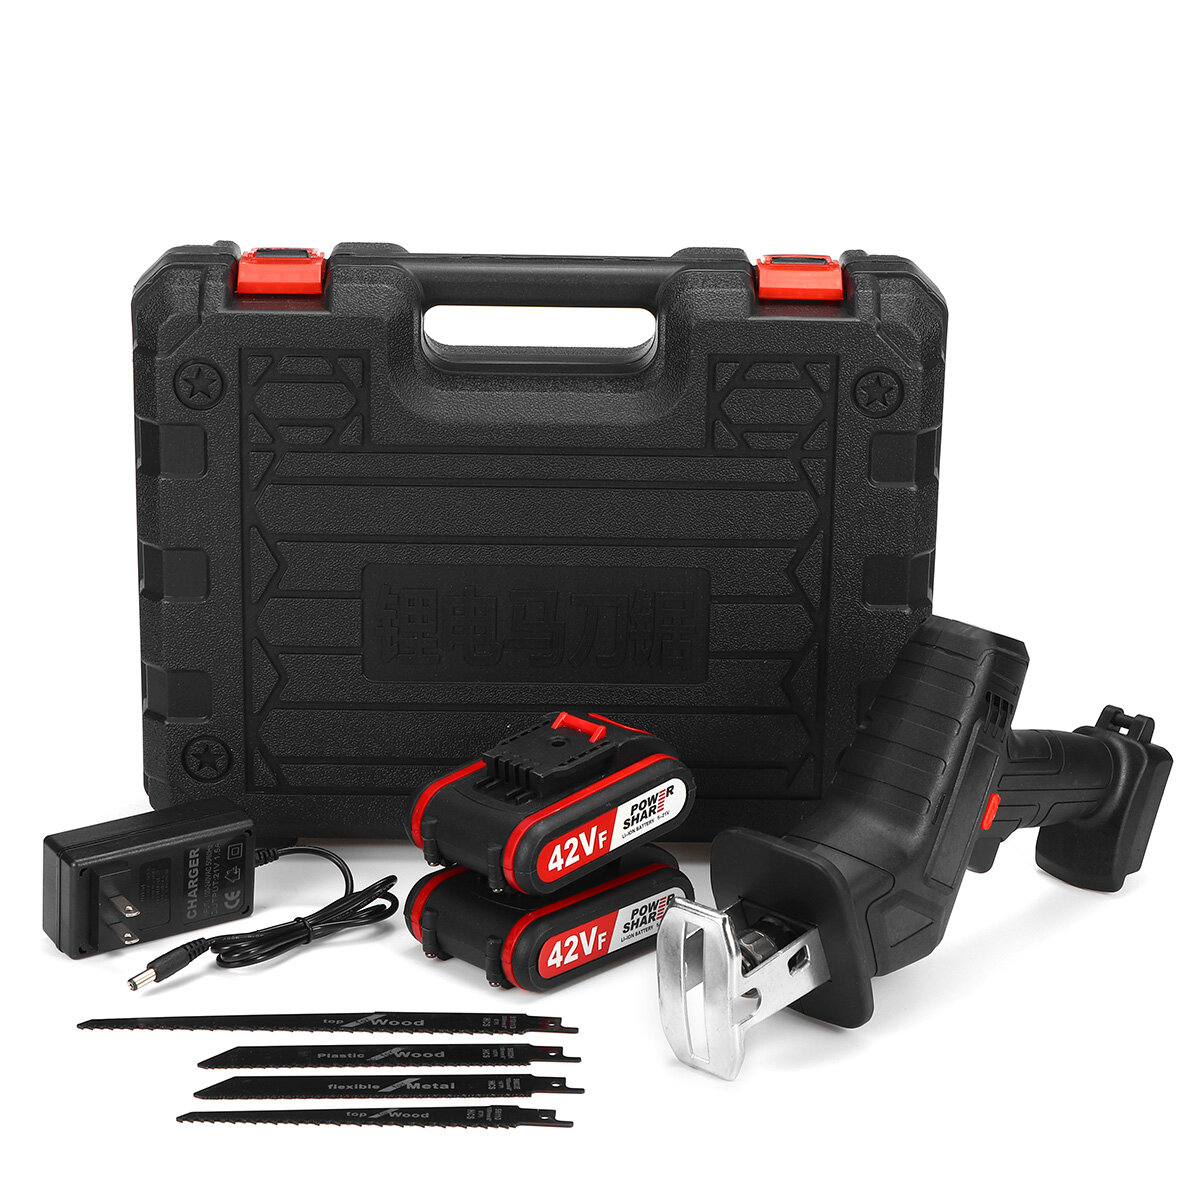 Image of 36VF/42VF Cordless Reciprocating Saw Mini Electric Saws Set W/ 2pcs LI-ION Rechargeable Battery